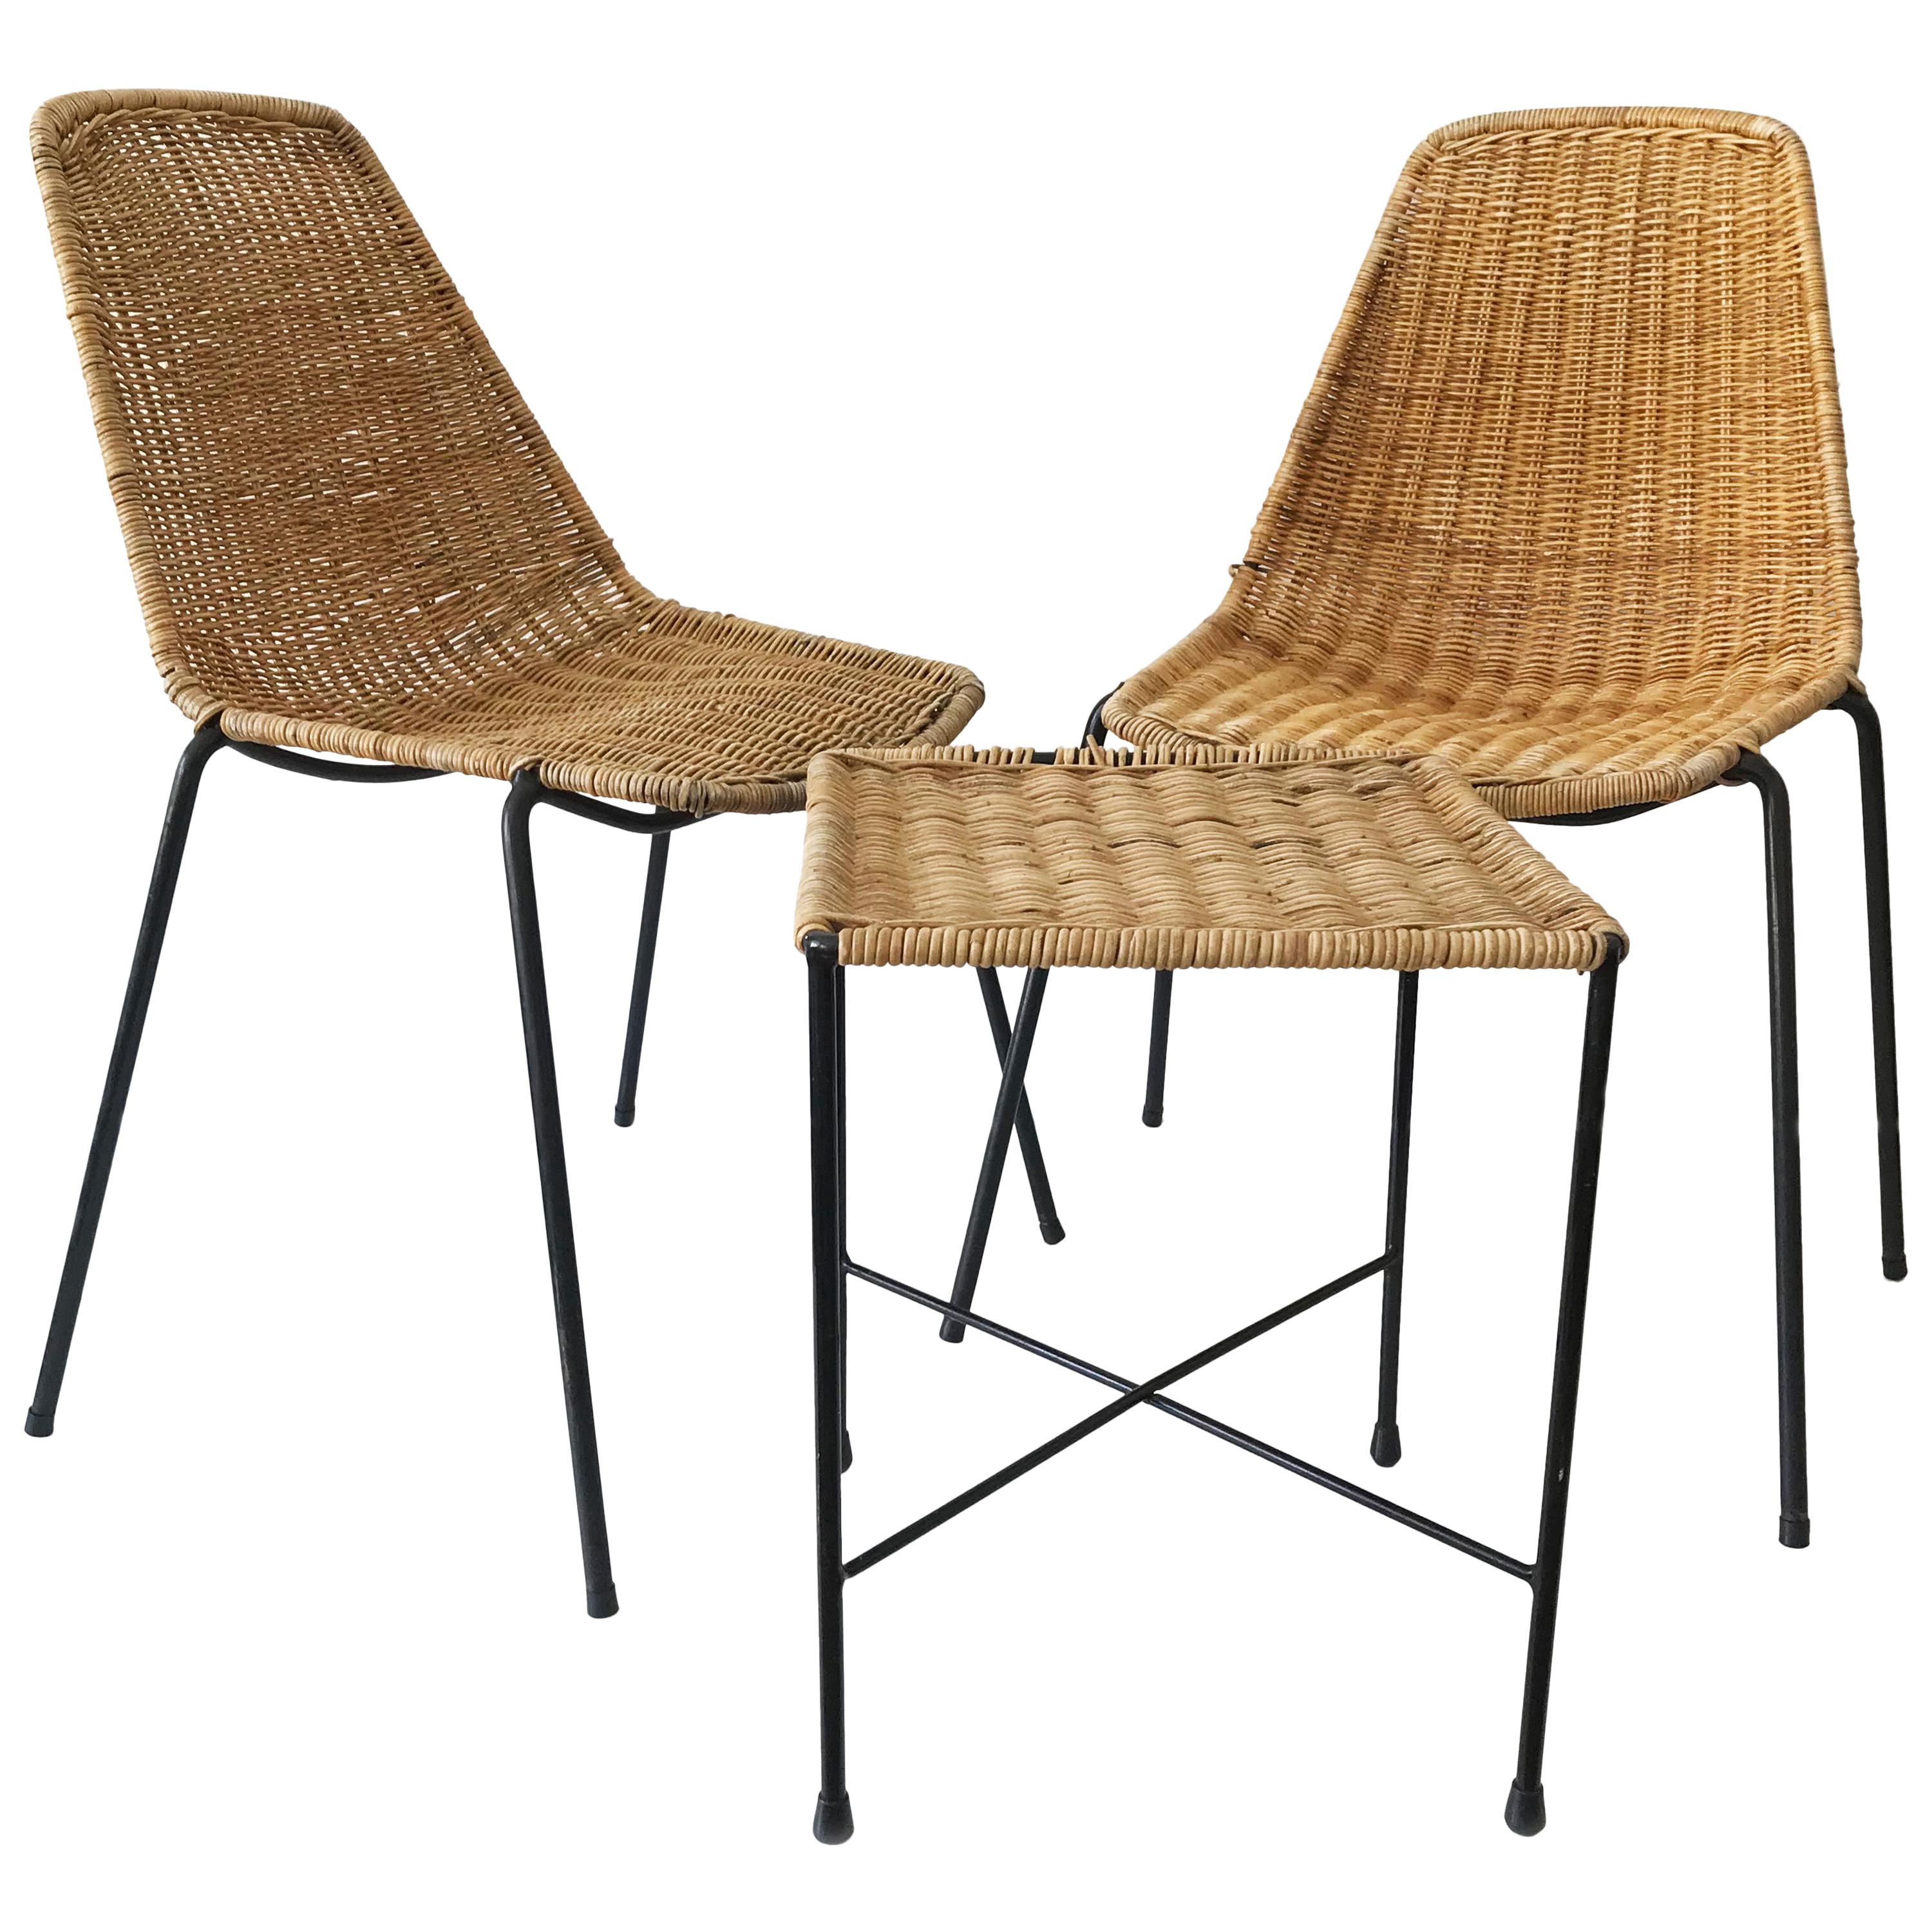 Set of Two Basket Chairs and Stool by Gian Franco Legler, 1951, Switzerland